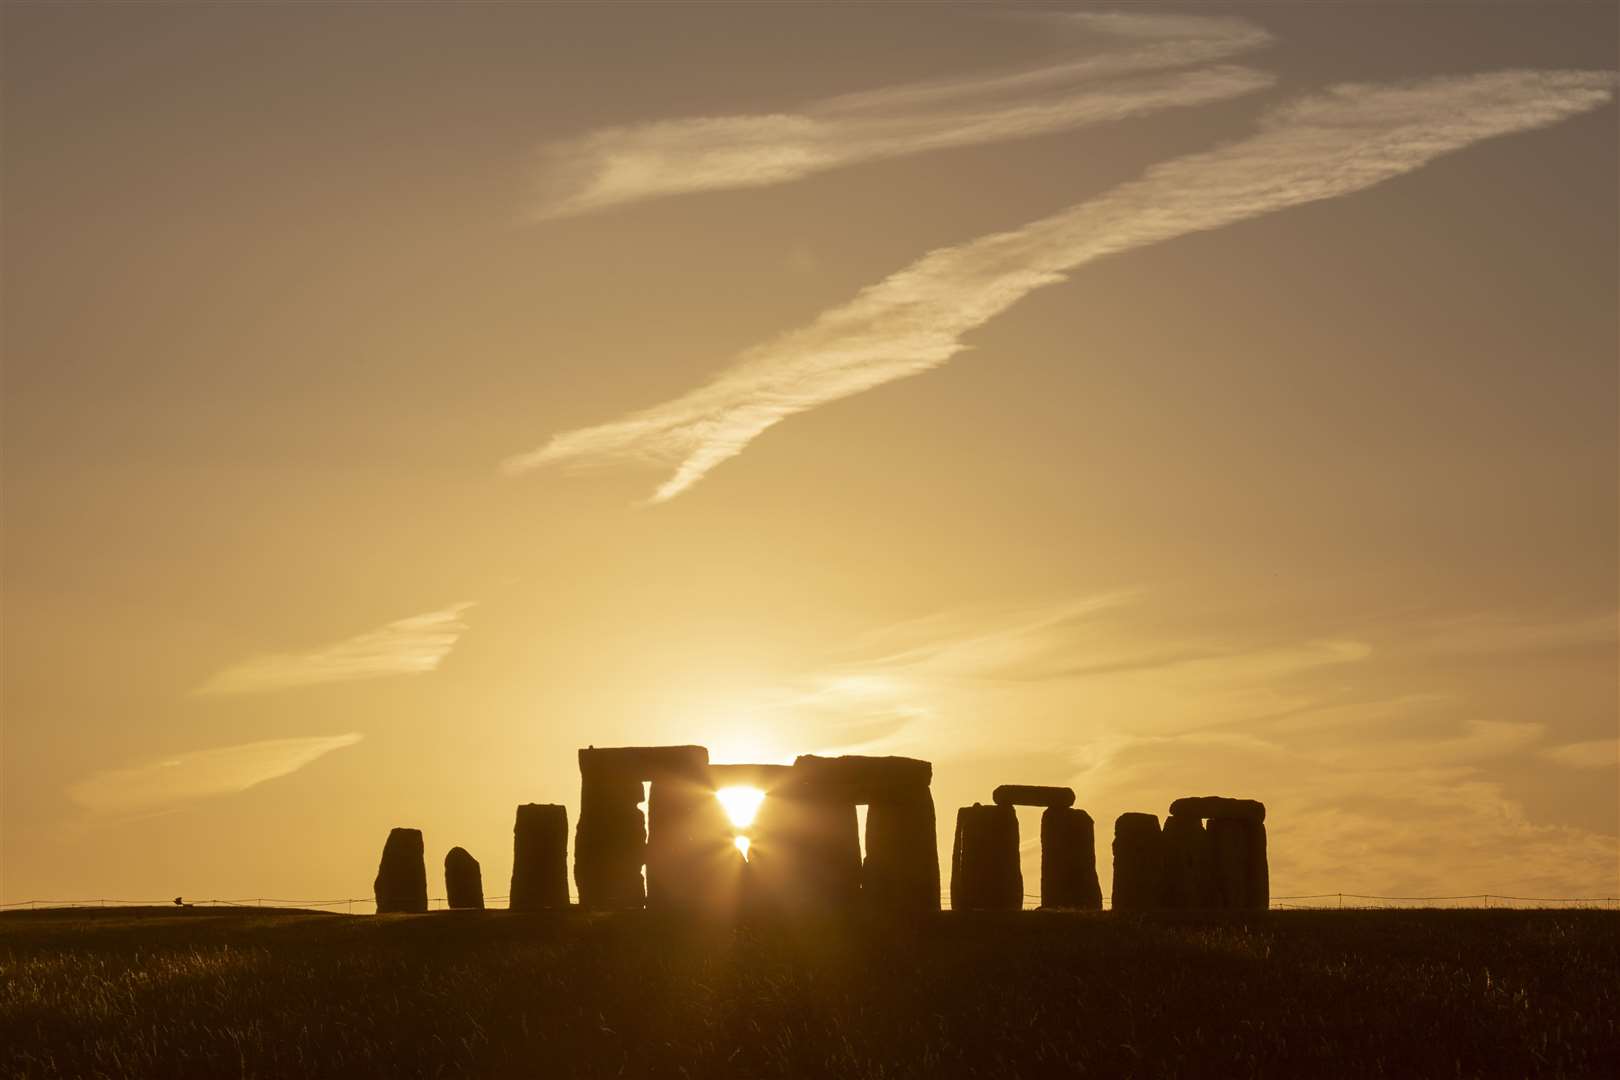 Thousands are expected at Stonehenge on Tuesday. Photo: Adobe stock image.